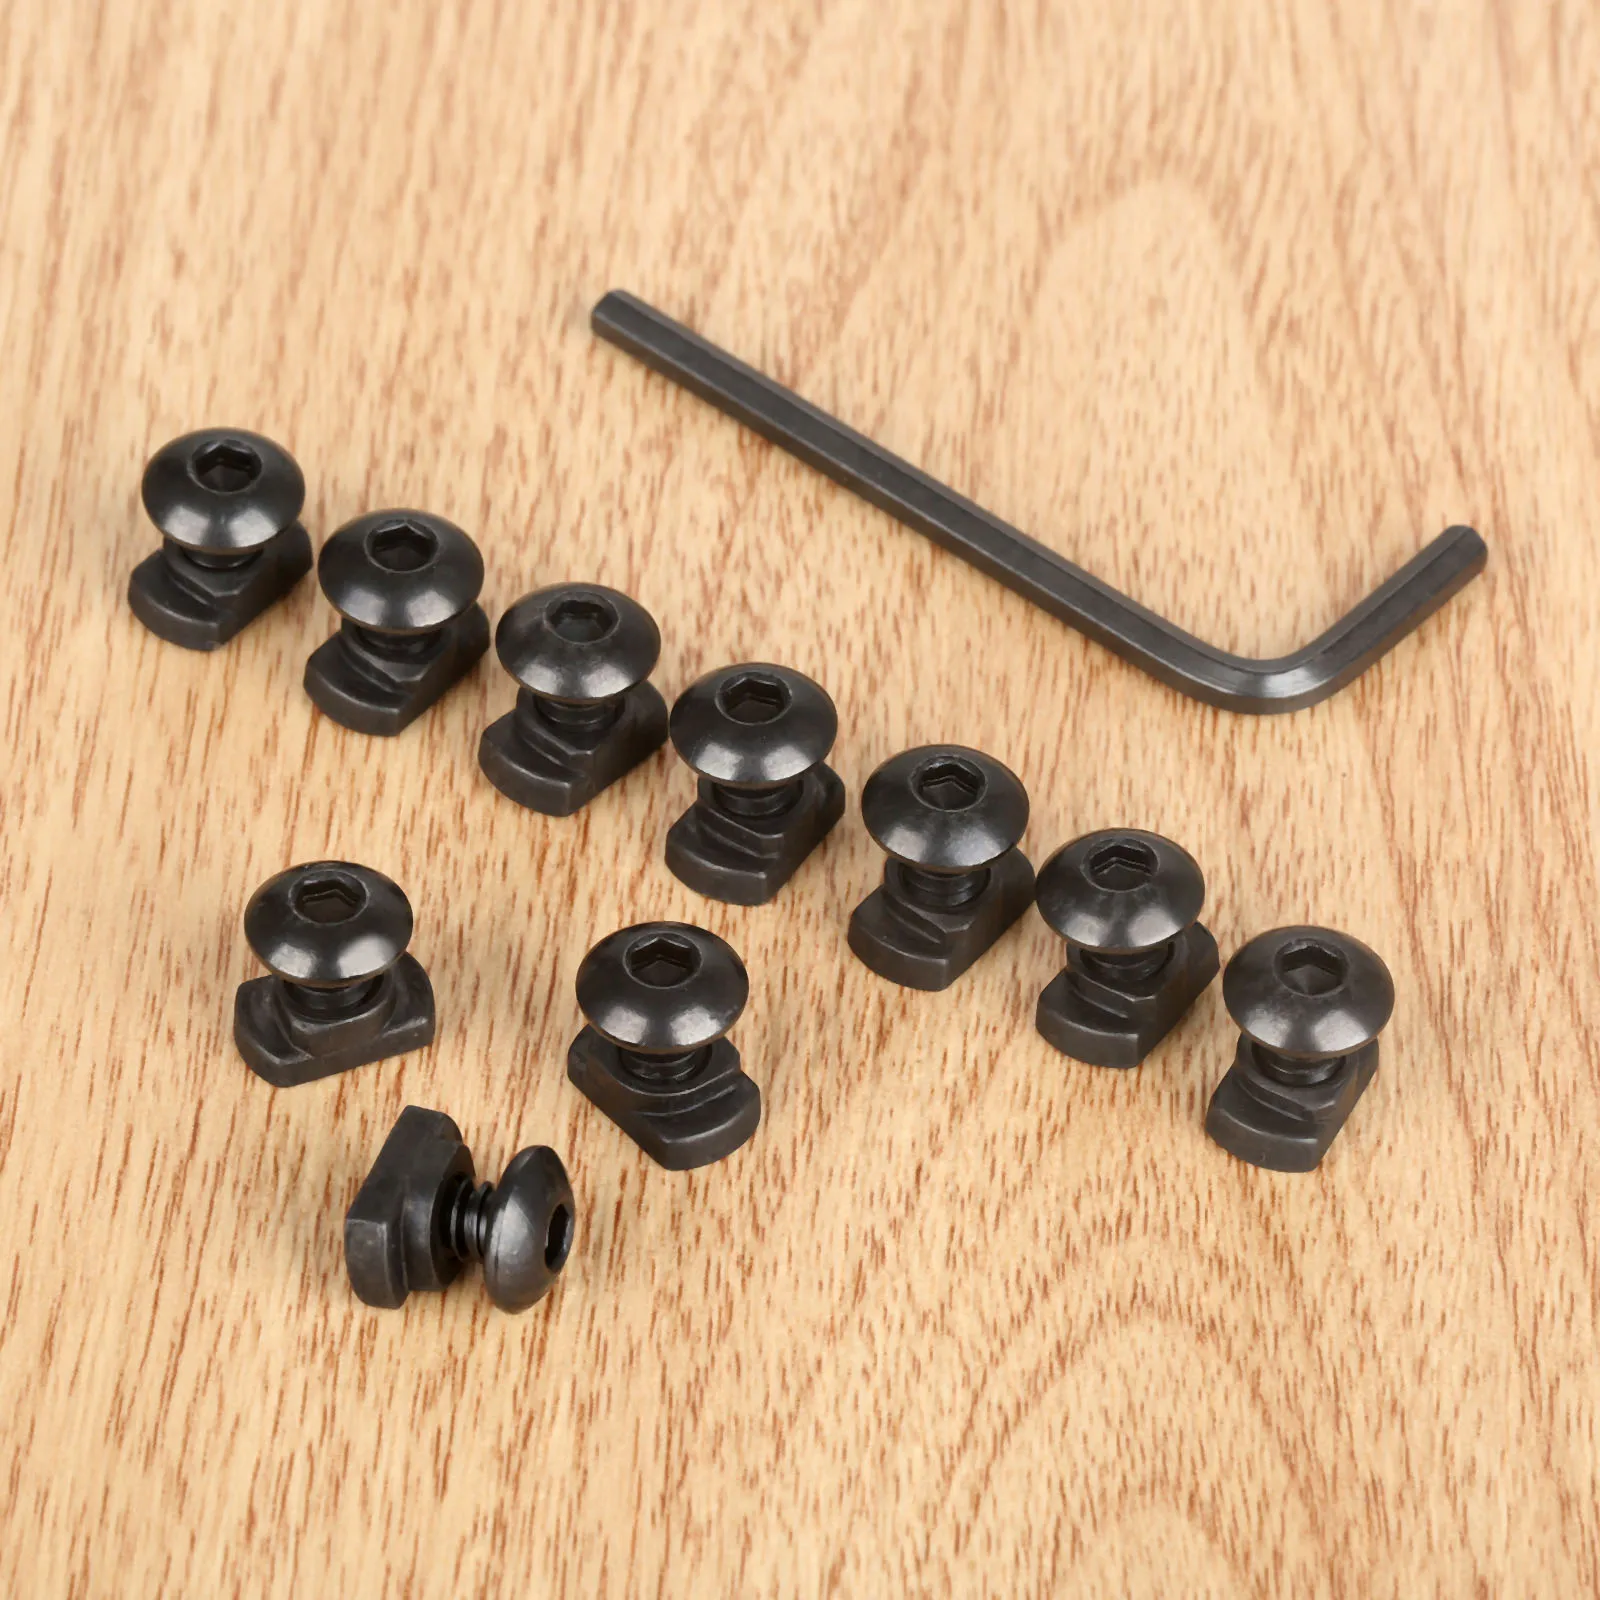 

Tactical 10 Sets Steel Hunting Gun Replacement Screws And Nuts Set Fit For Any M-LOK Slots Handguard Rail Sections Keymod